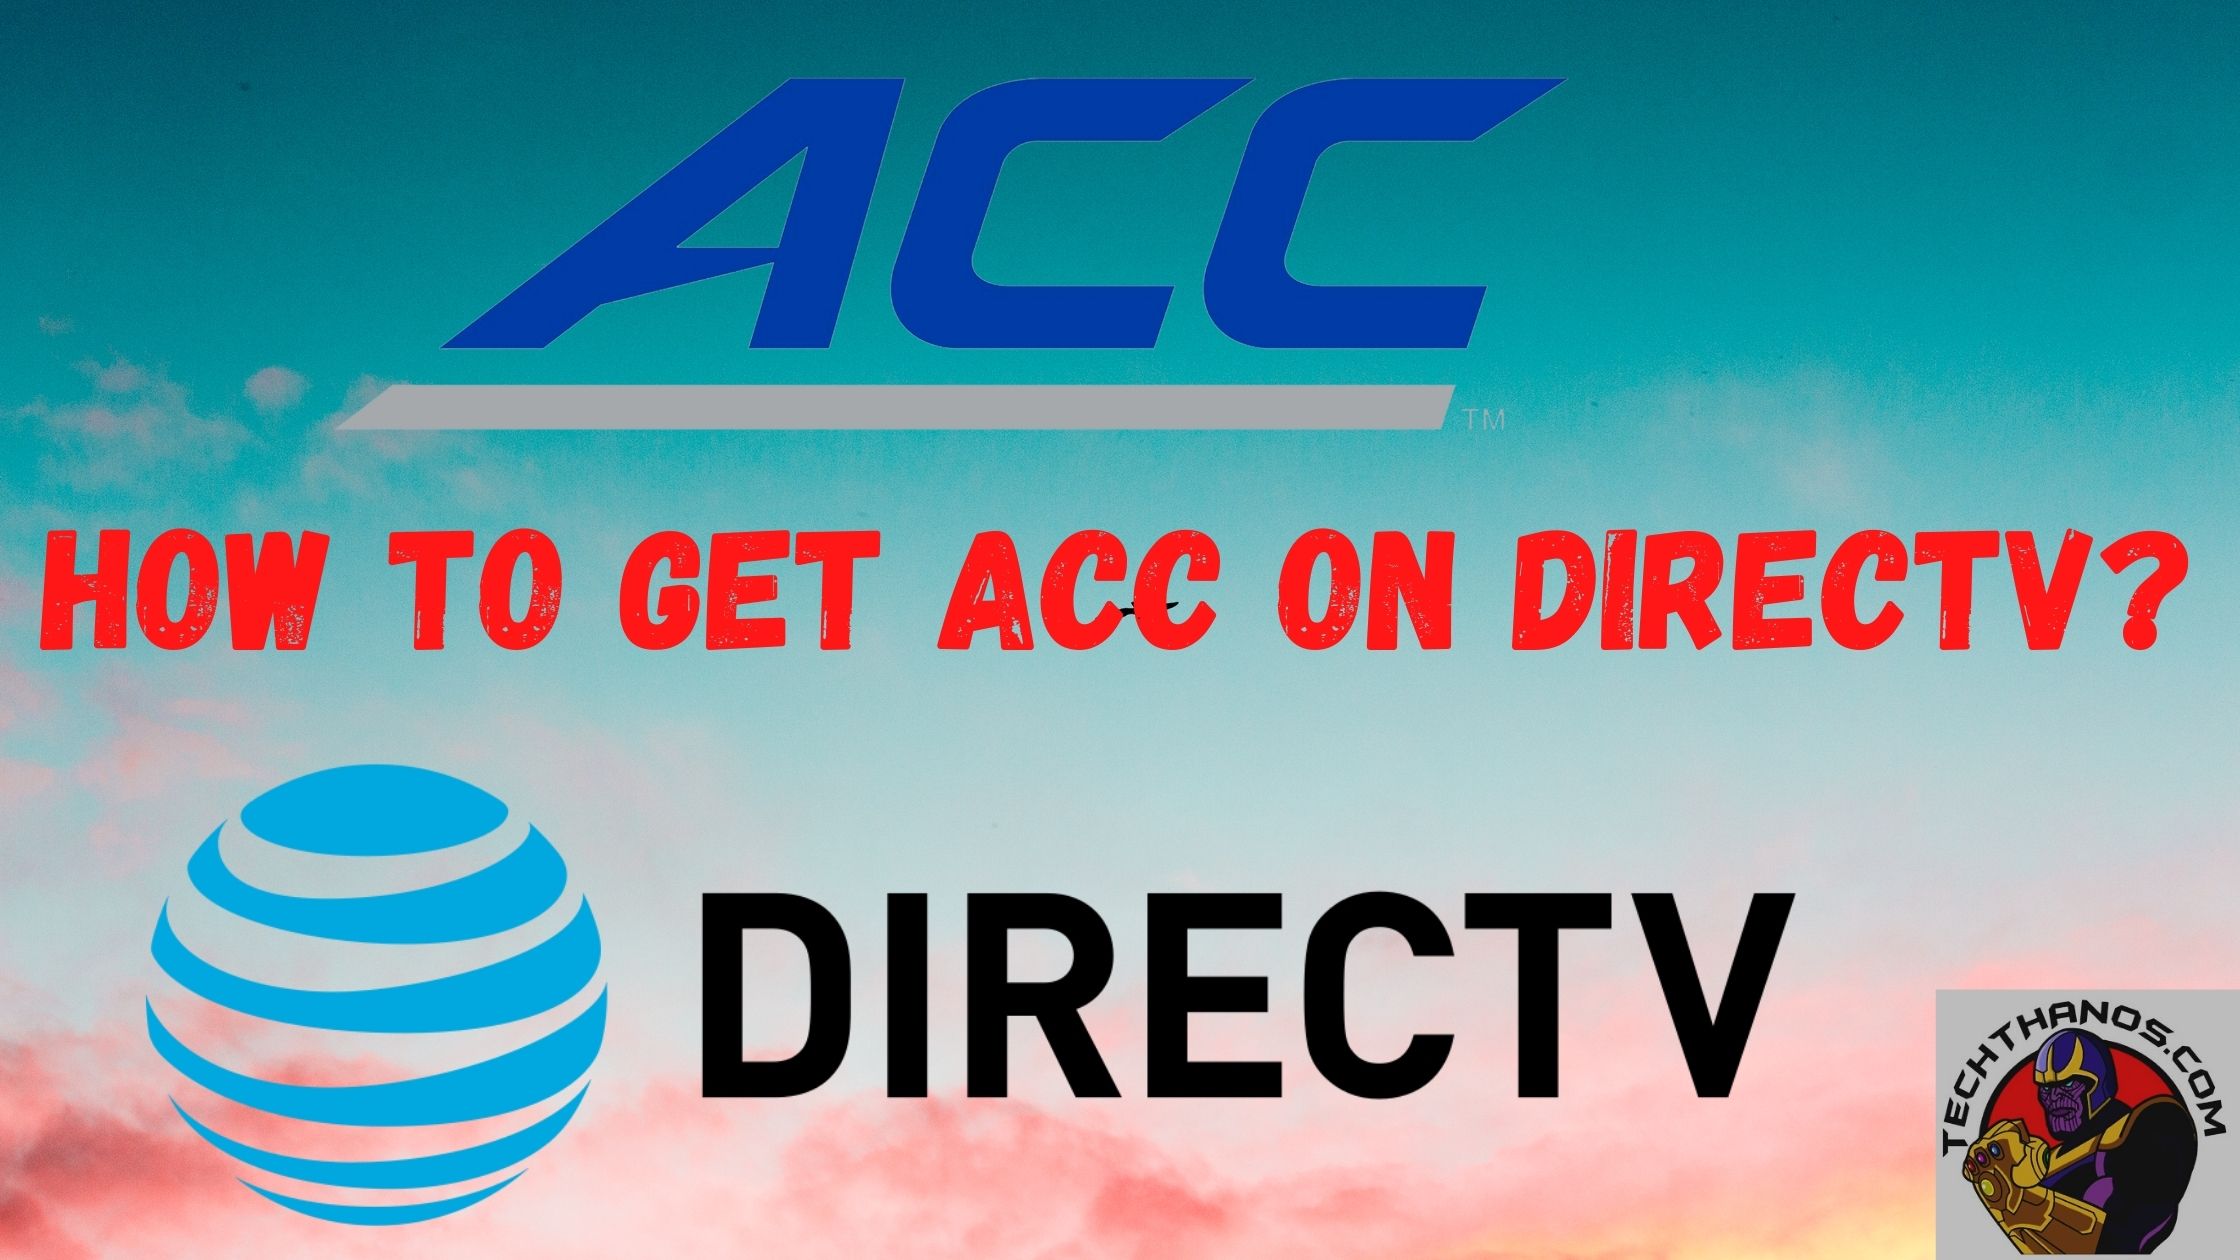 How to get ACC on DirecTV?